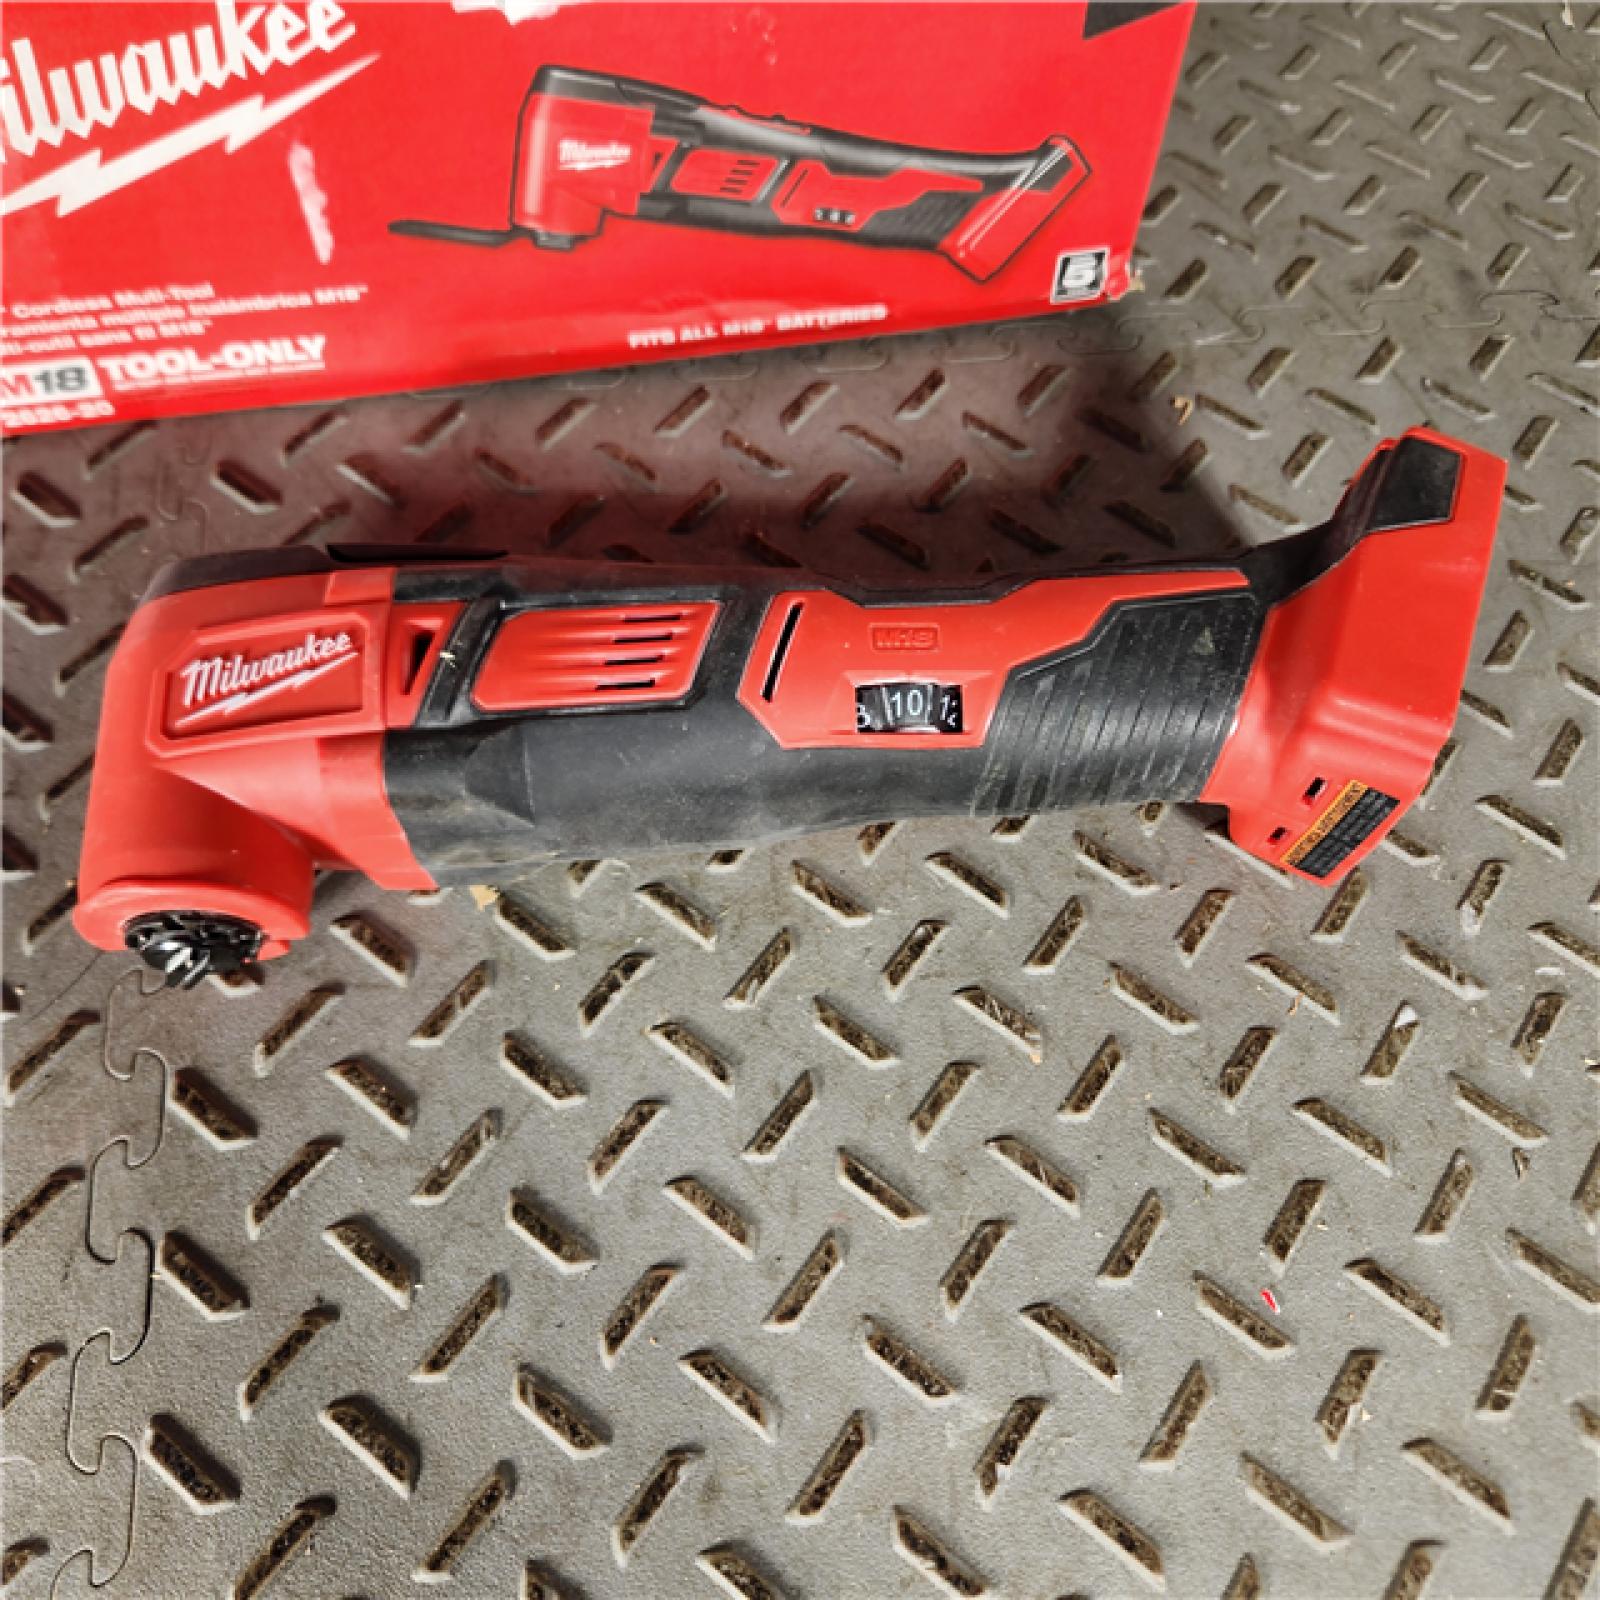 Houston Location - As-Is M18 Multi-Tool (TOOL ONLY) - Appears IN GOOD Condition